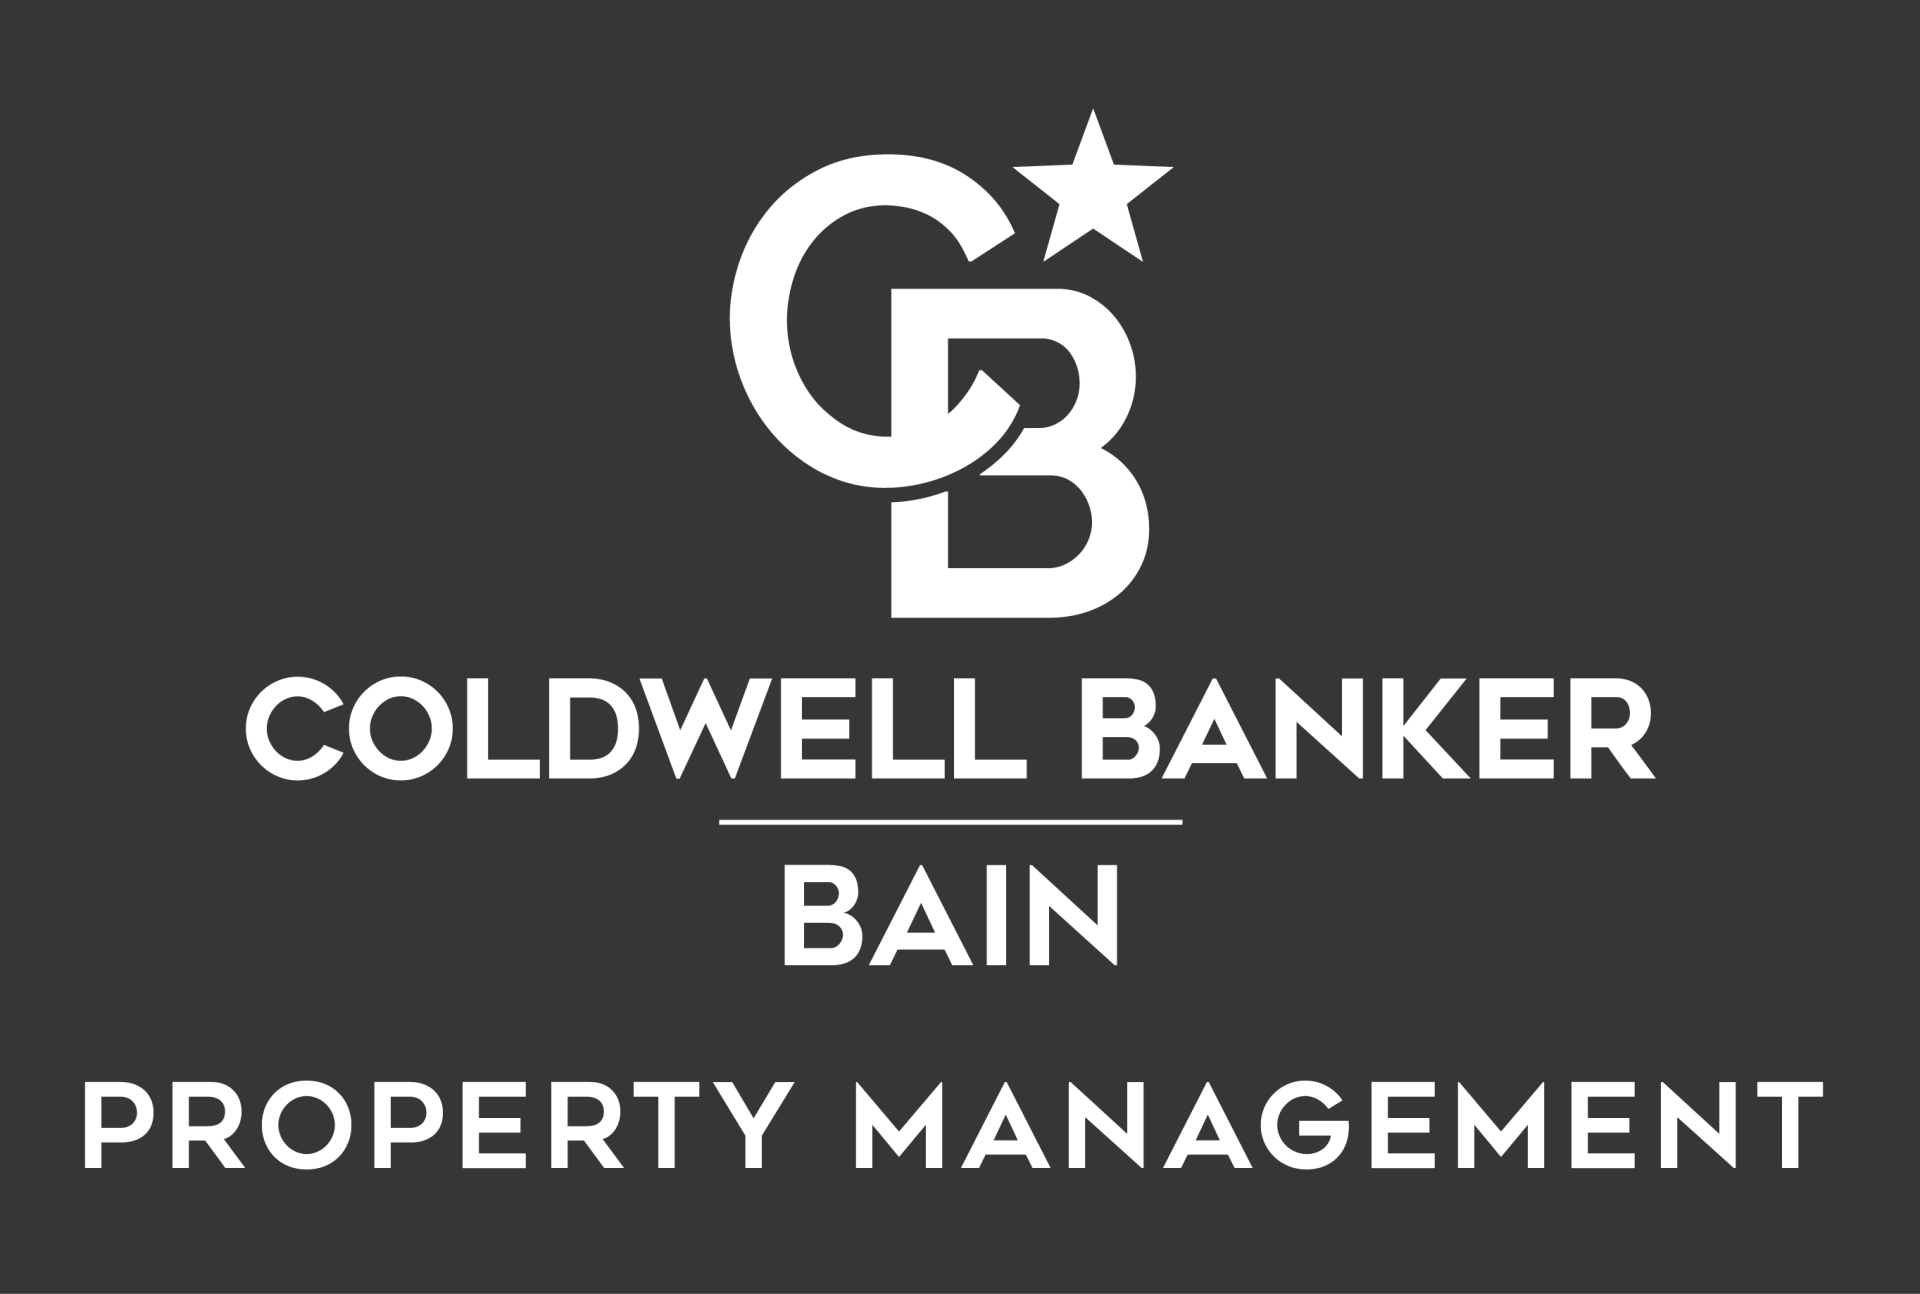 Coldwell Banker Bain Property Management Home Page